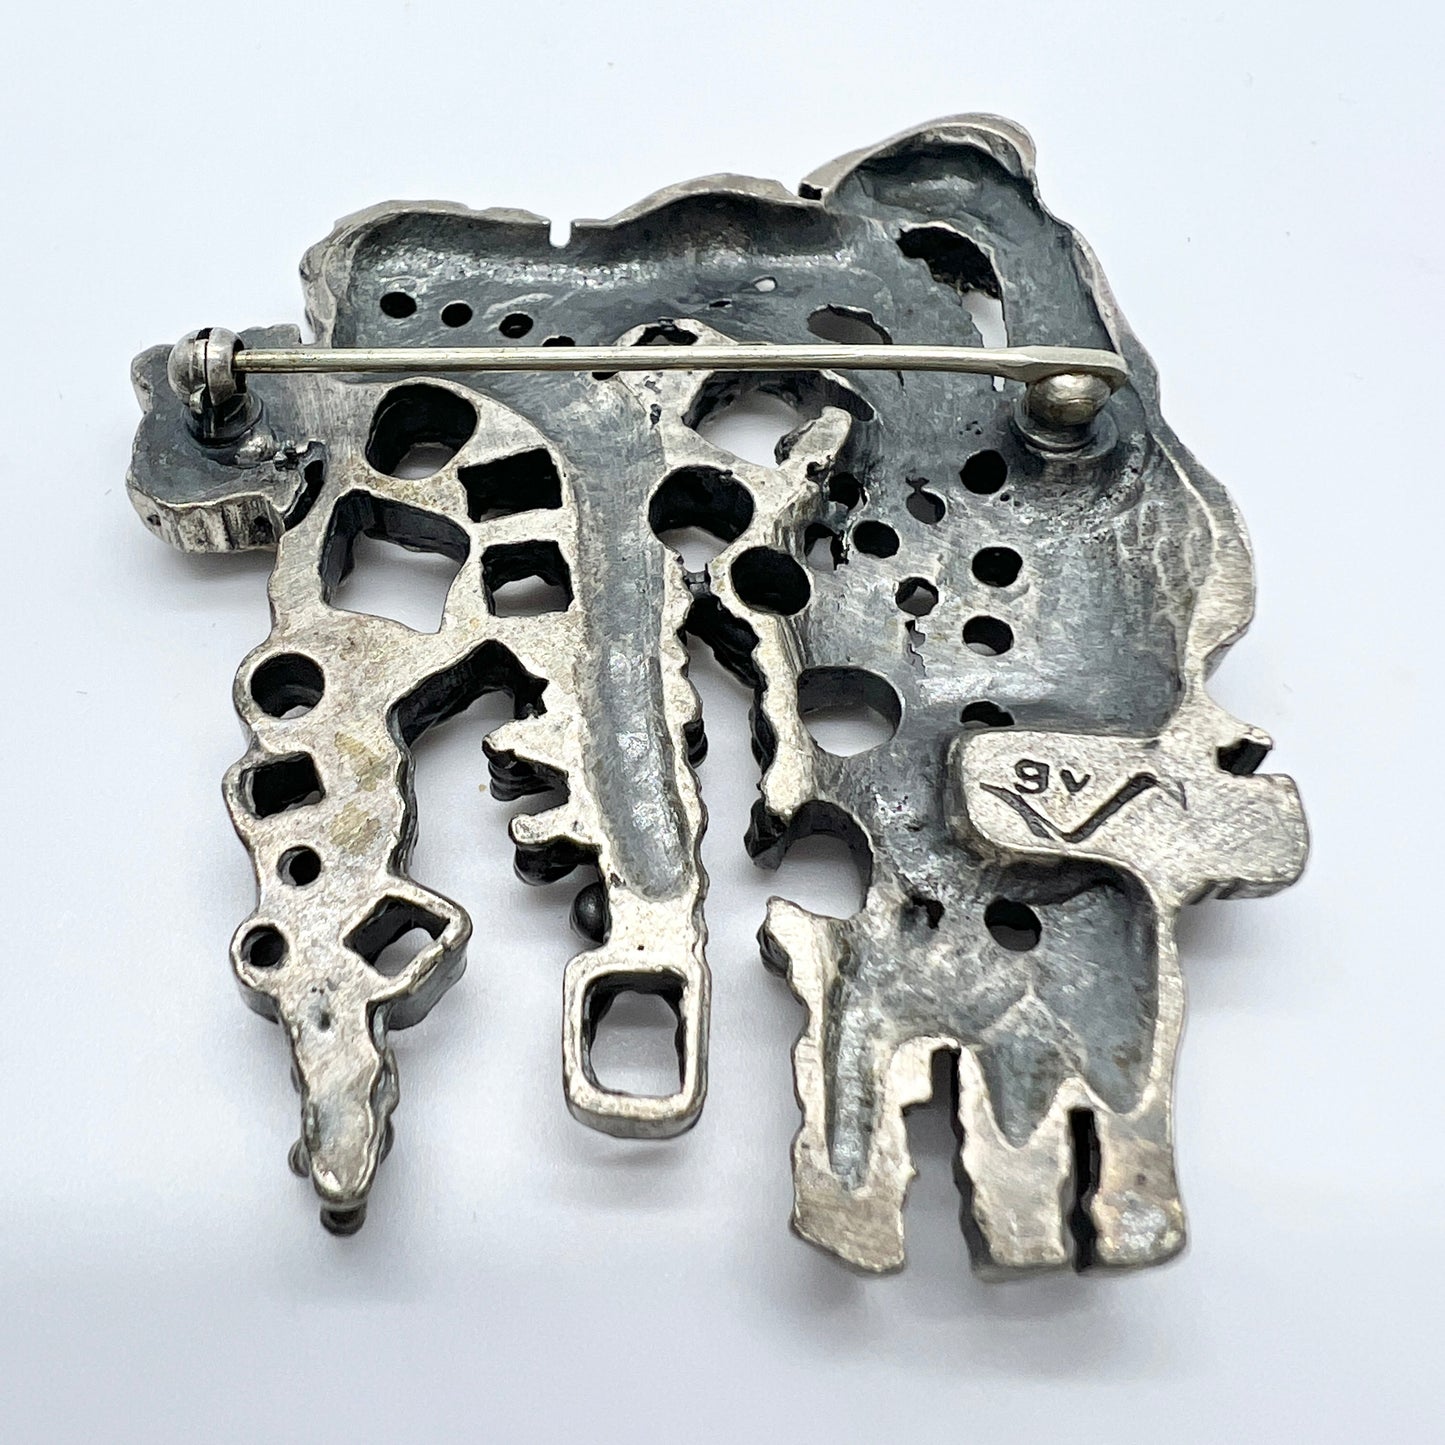 Guy Vidal, Canada early 1970s. Vintage Modernist Plated Pewter Brooch.